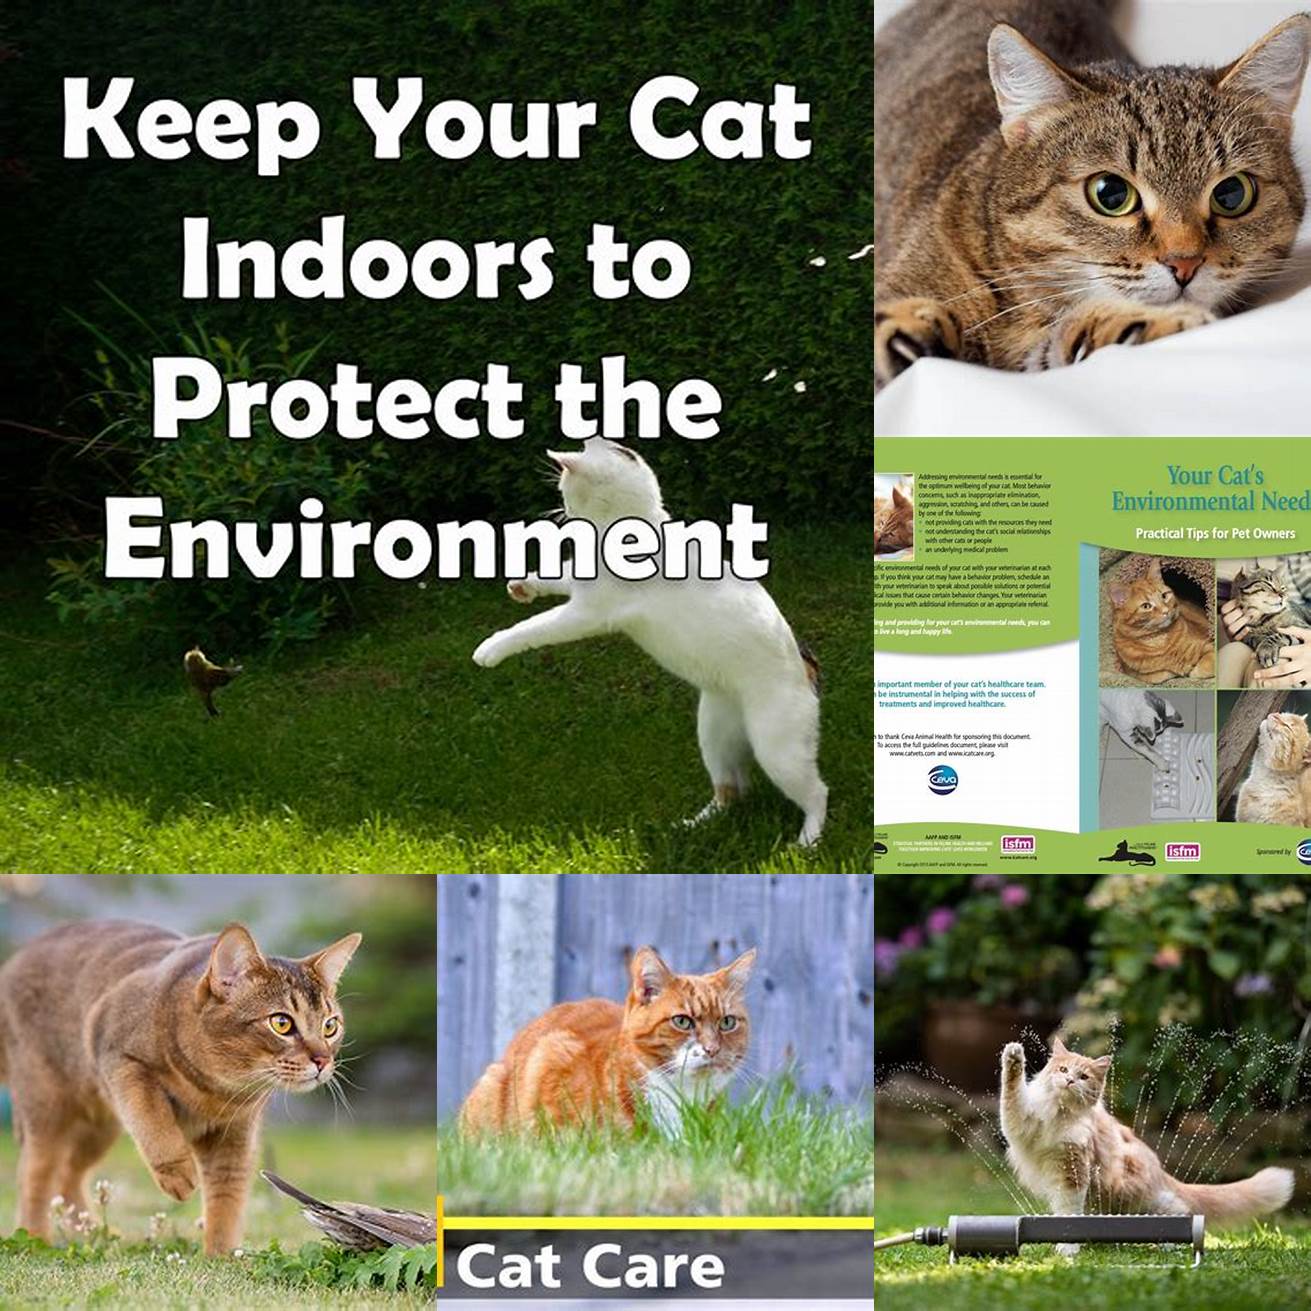 Keep your cats environment clean and free from potential hazards